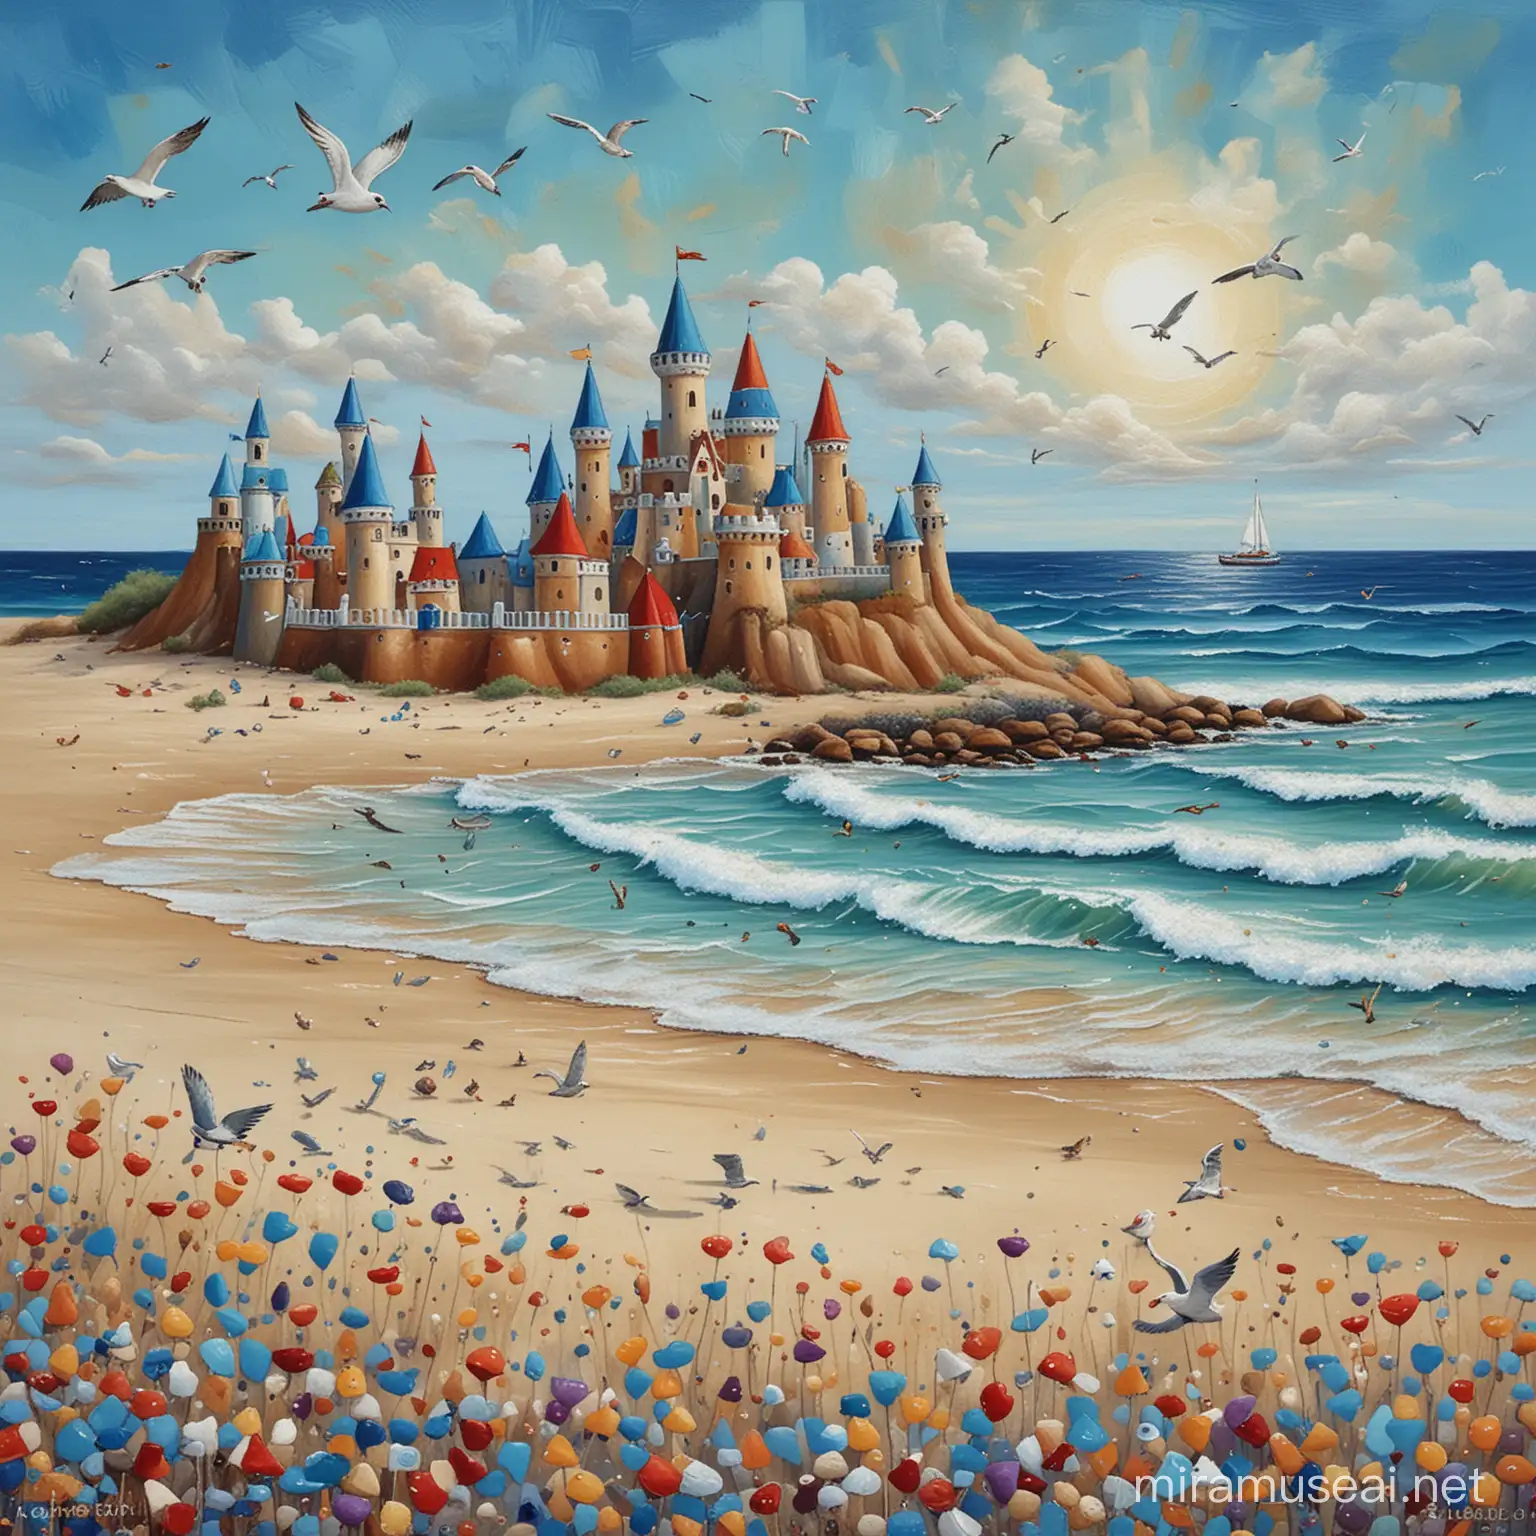 Small colorful castles in the sand of a beach with a blue sea, small colorful beings playing in the sand, seagulls flying in the blue sky. abstract folk art Karla Gerard